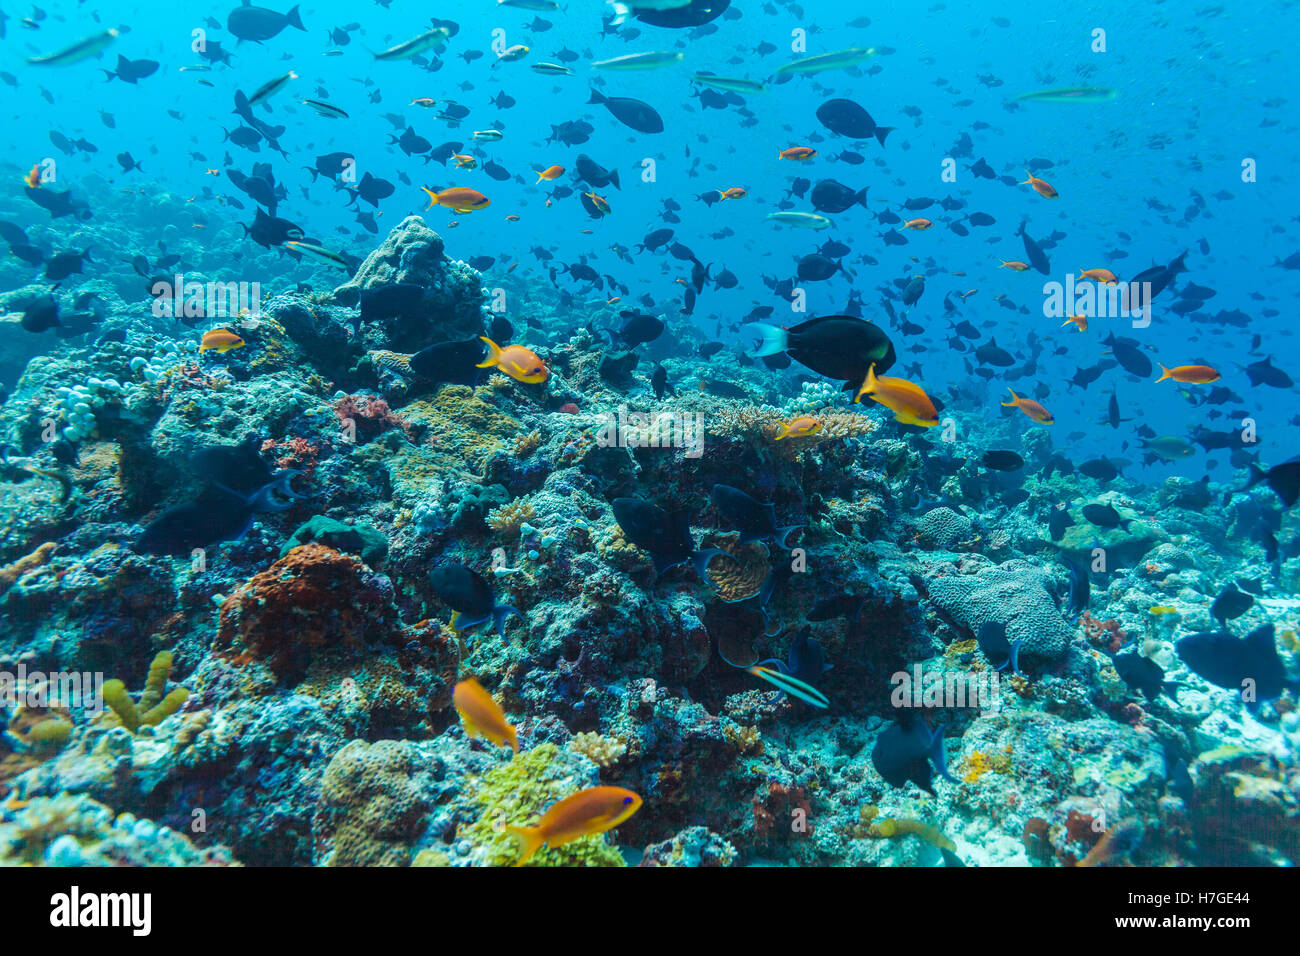 Many different colorful small fishes in ocean blue background Stock Photo